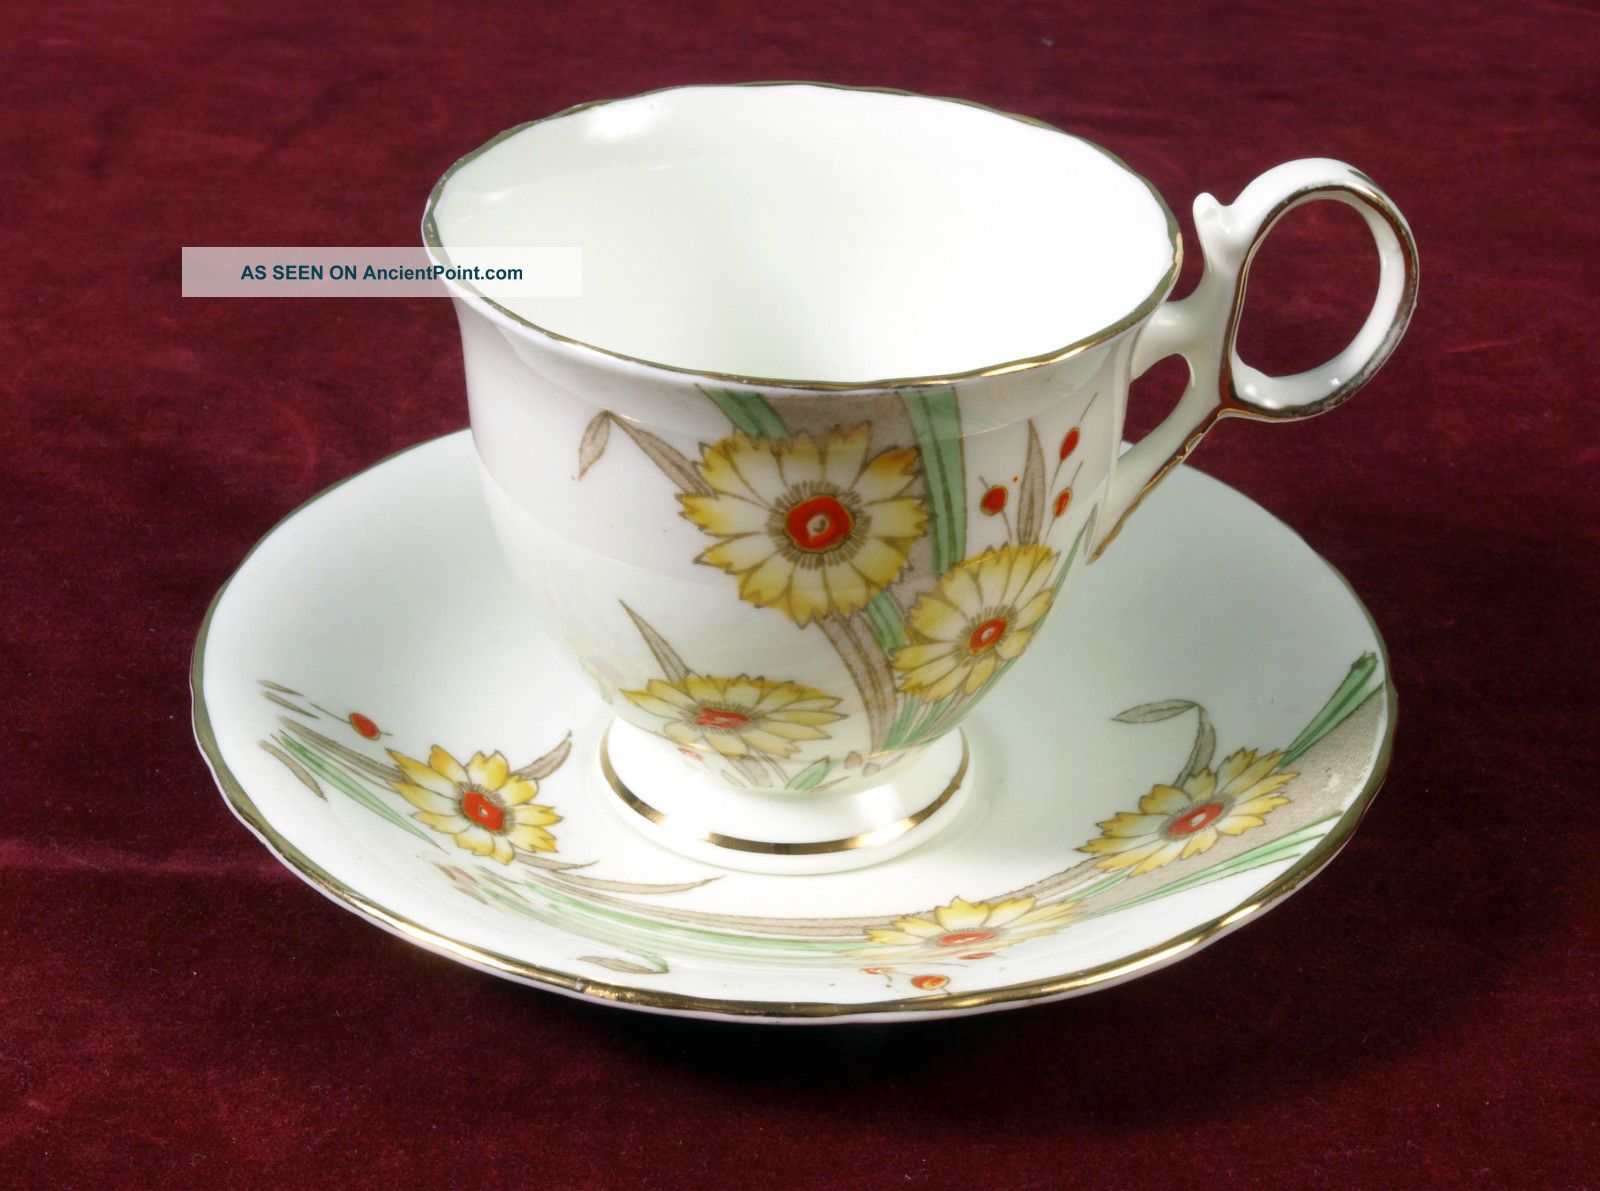 Vintage Art Deco Teacup And Saucer,  Delphine China,  Sunny Yellow Flowers,  1930s Cups & Saucers photo